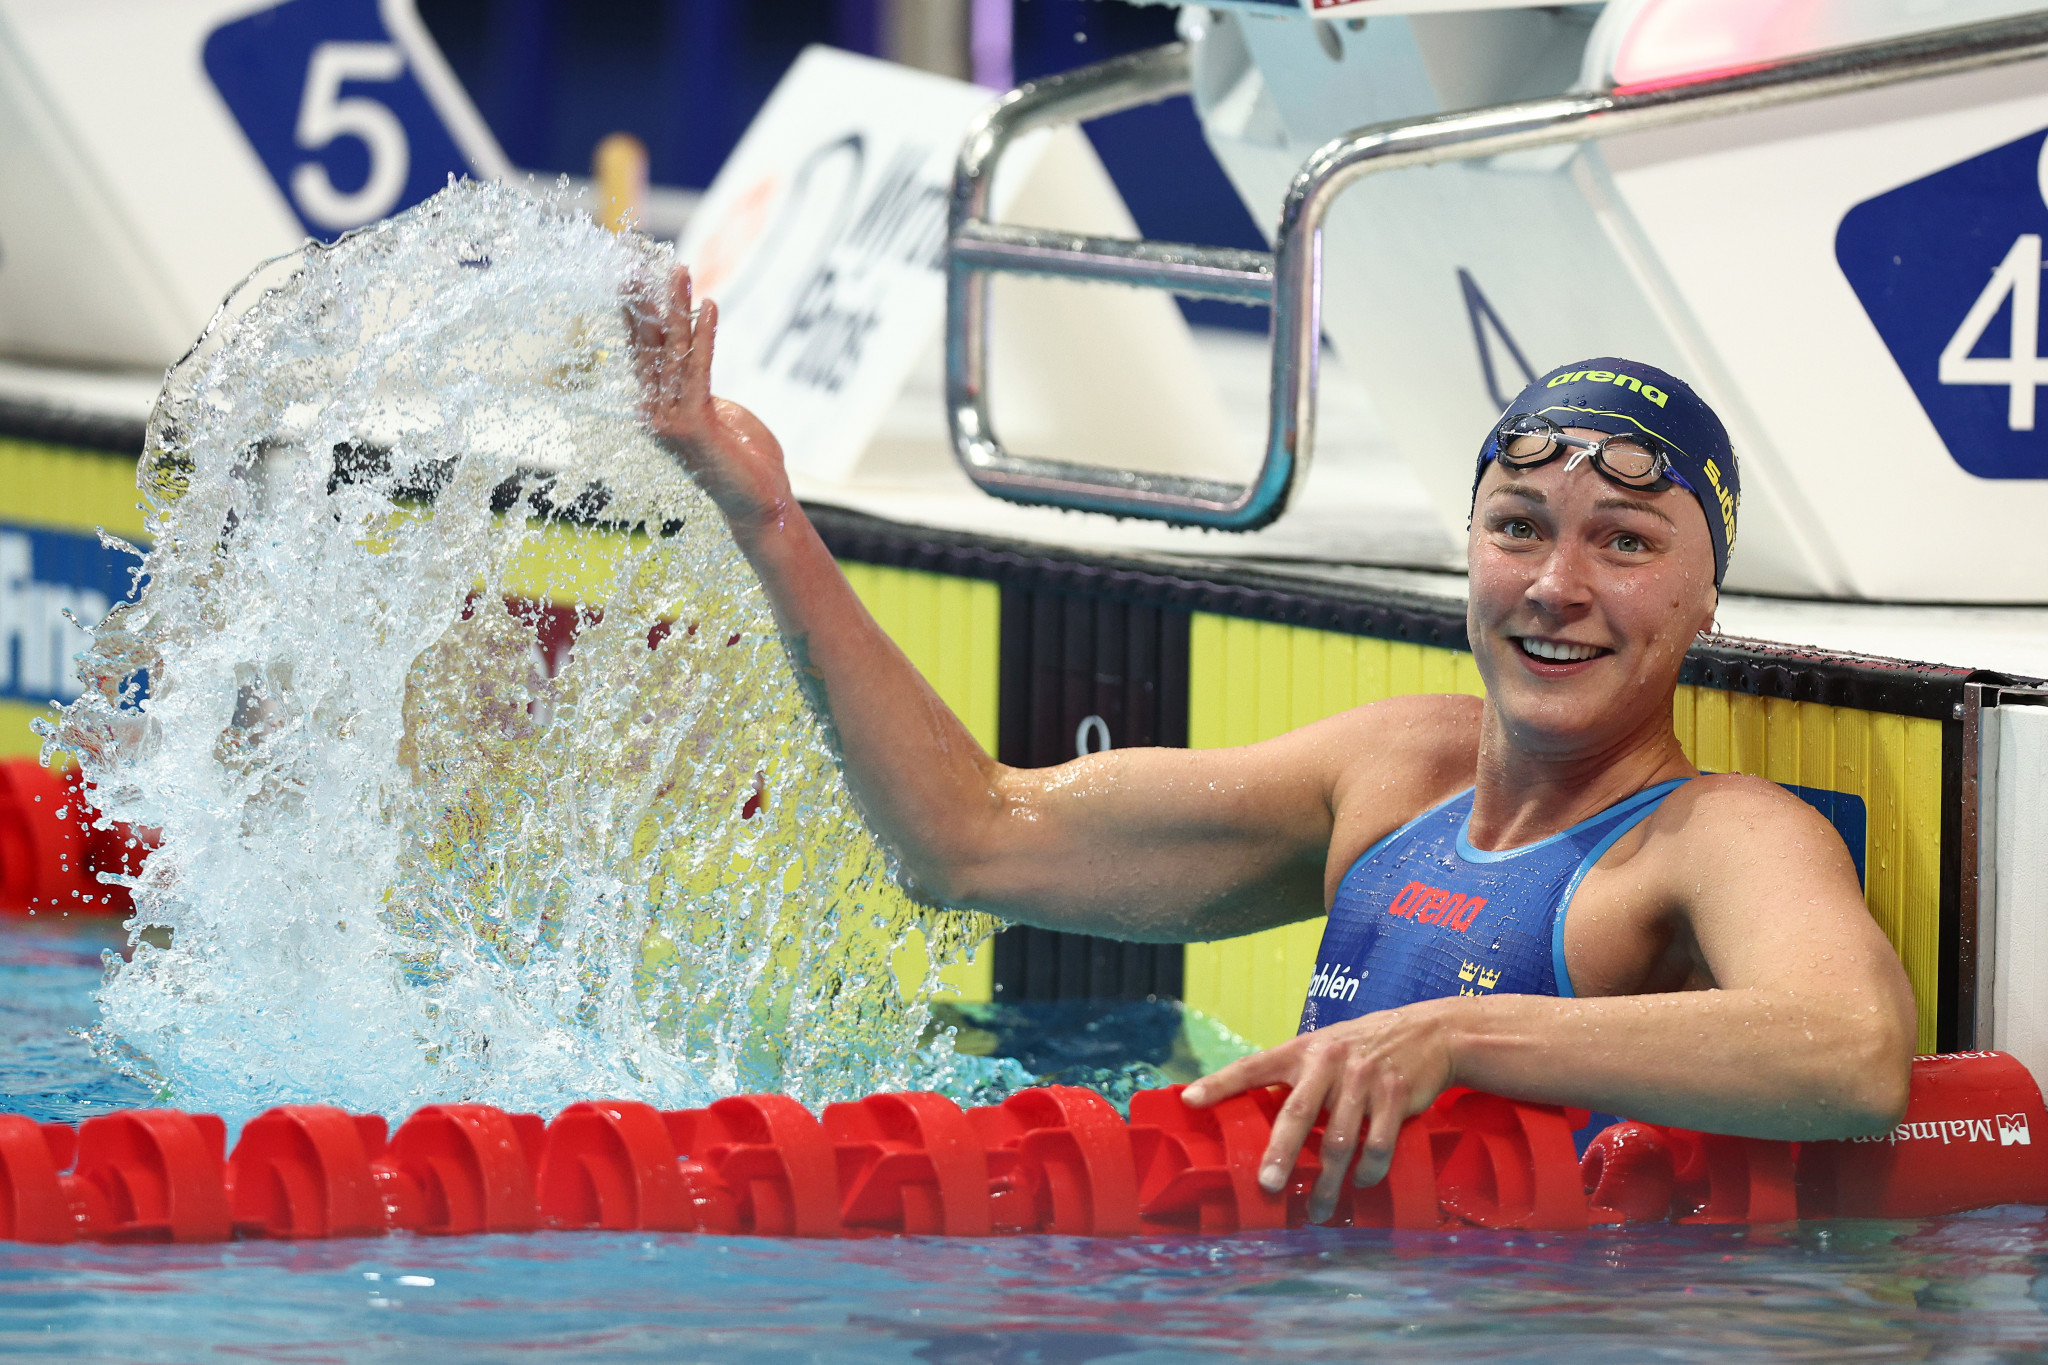 Sweden's Sarah Sjöström won the women's 50m butterfly final for the fourth consecutive World Championships ©Getty Images